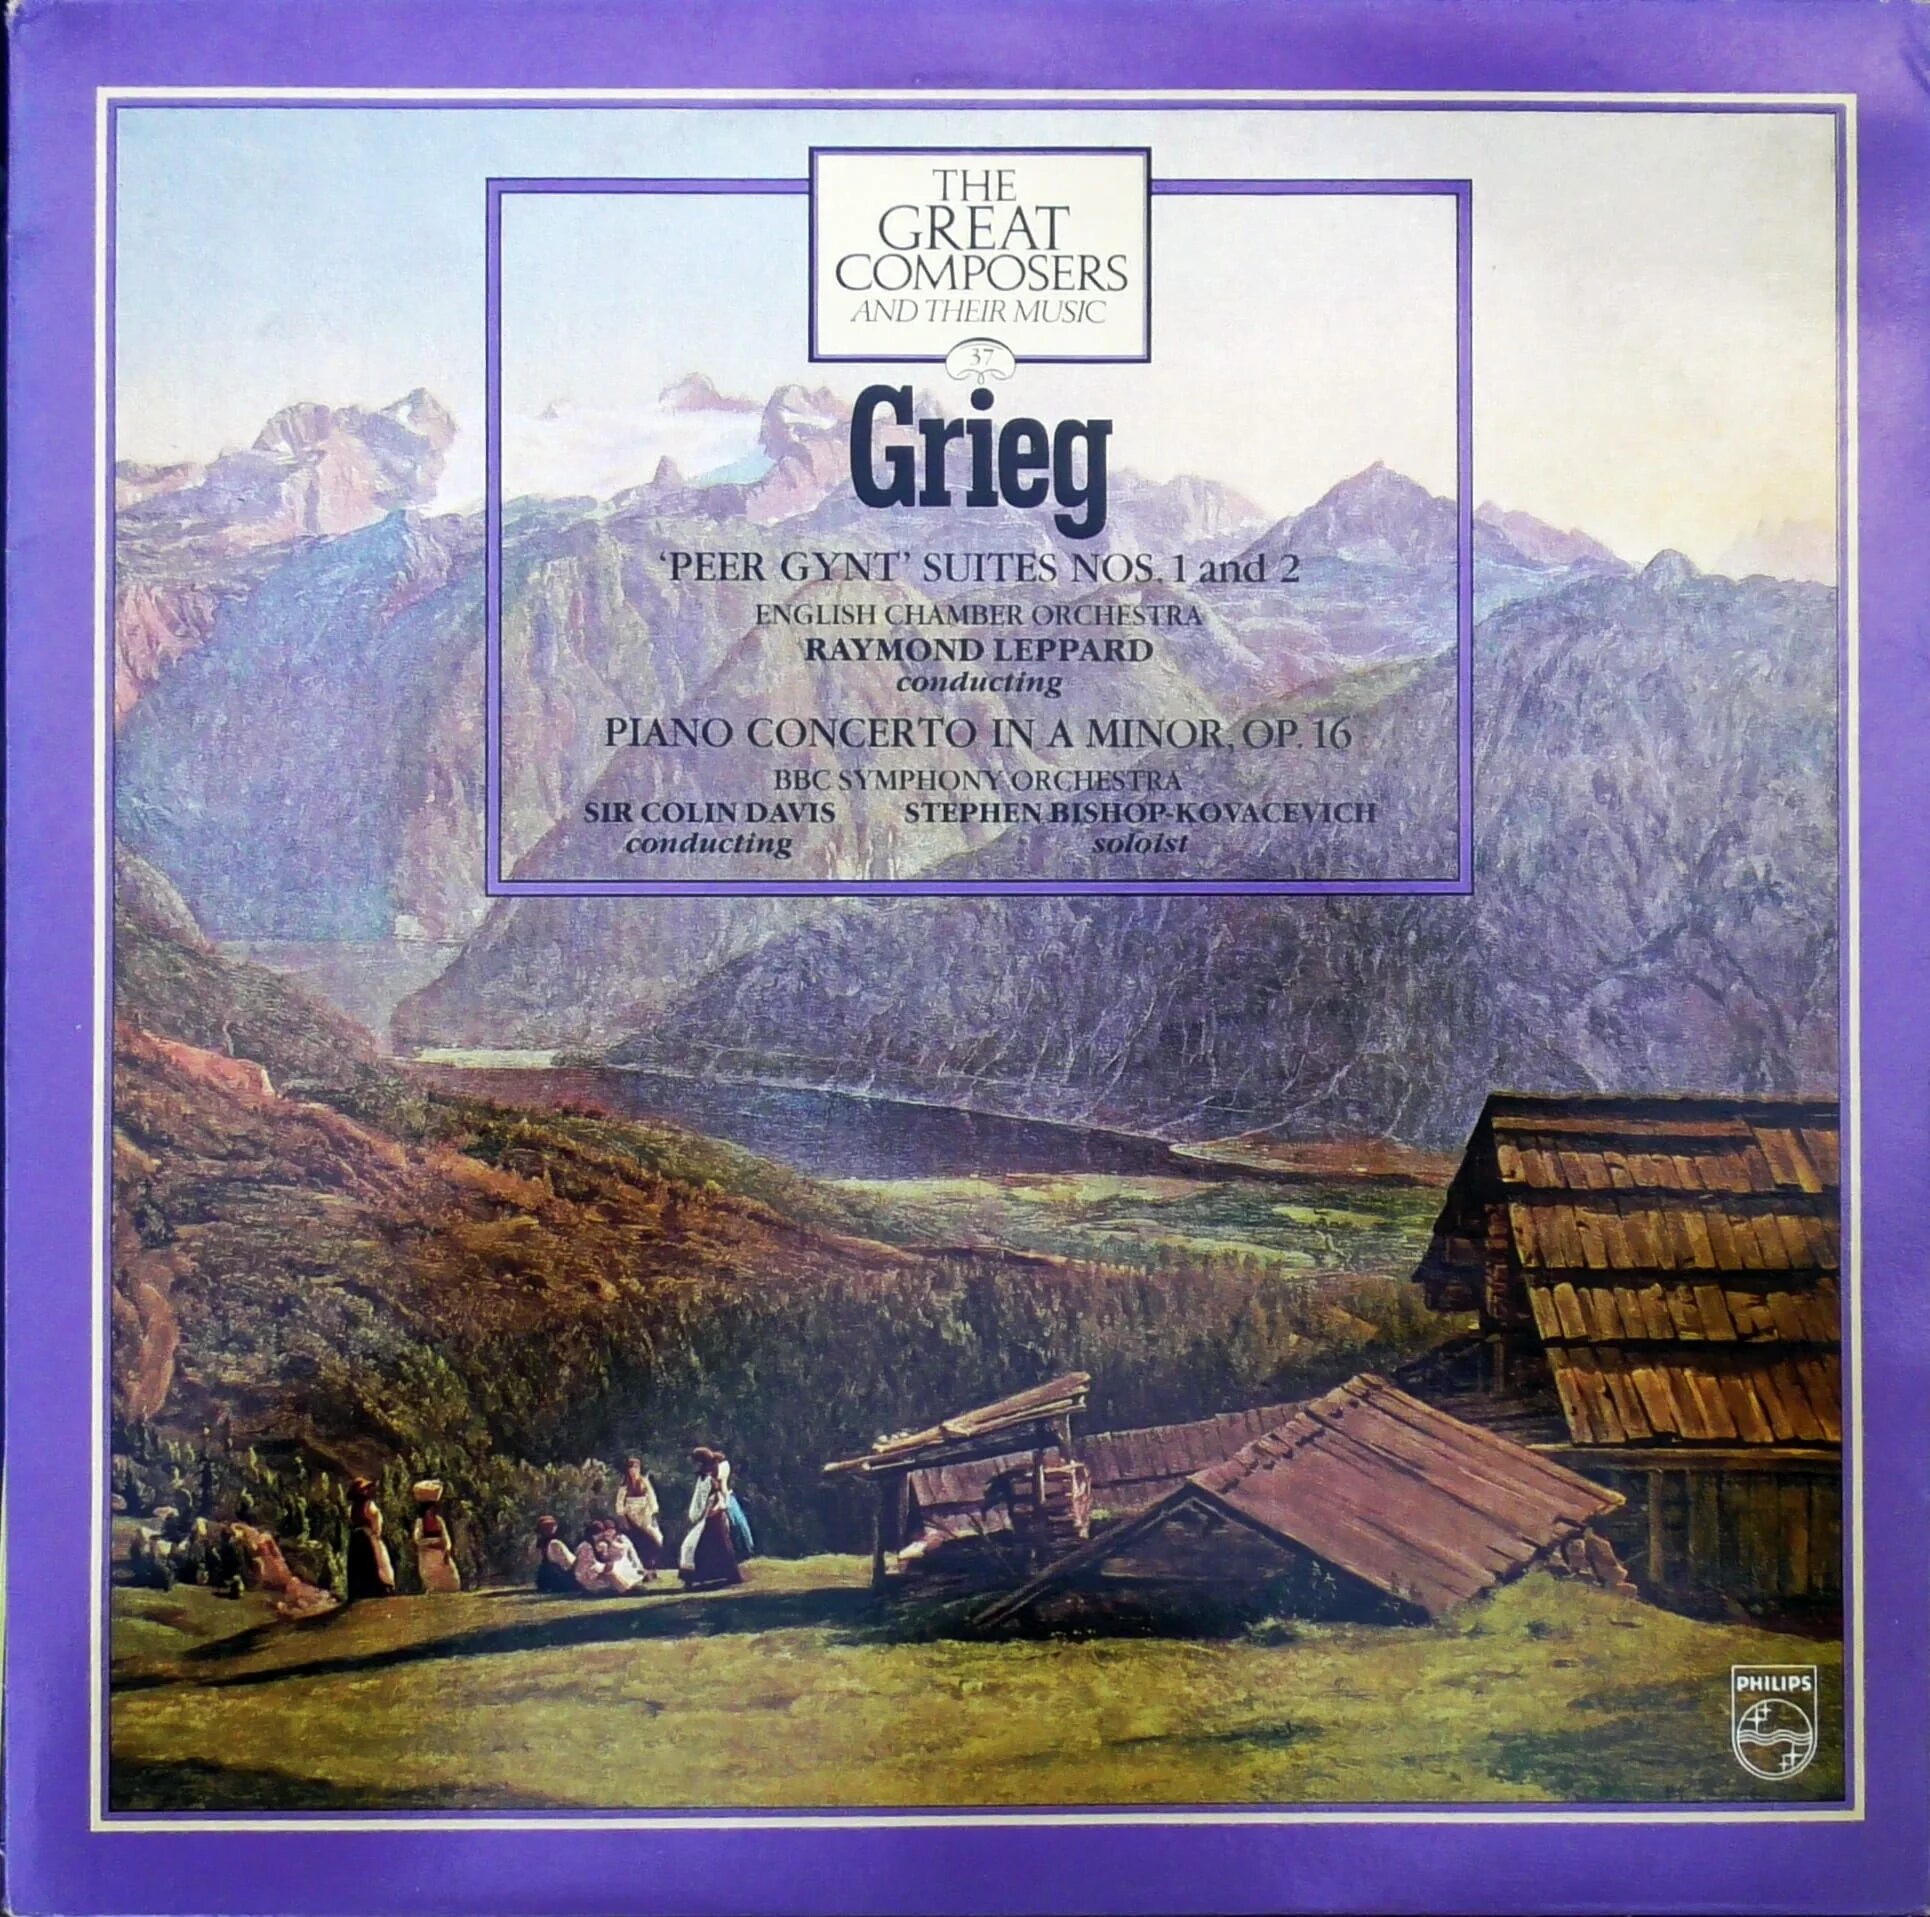 Grieg peer gynt. Edvard Grieg - Piano Concerto in a Minor, op. 16. Edvard Grieg Suites обложки. Edvard Grieg - Piano Concerto. 2009. Edvard.Grieg-Romantic.Classic.2001.